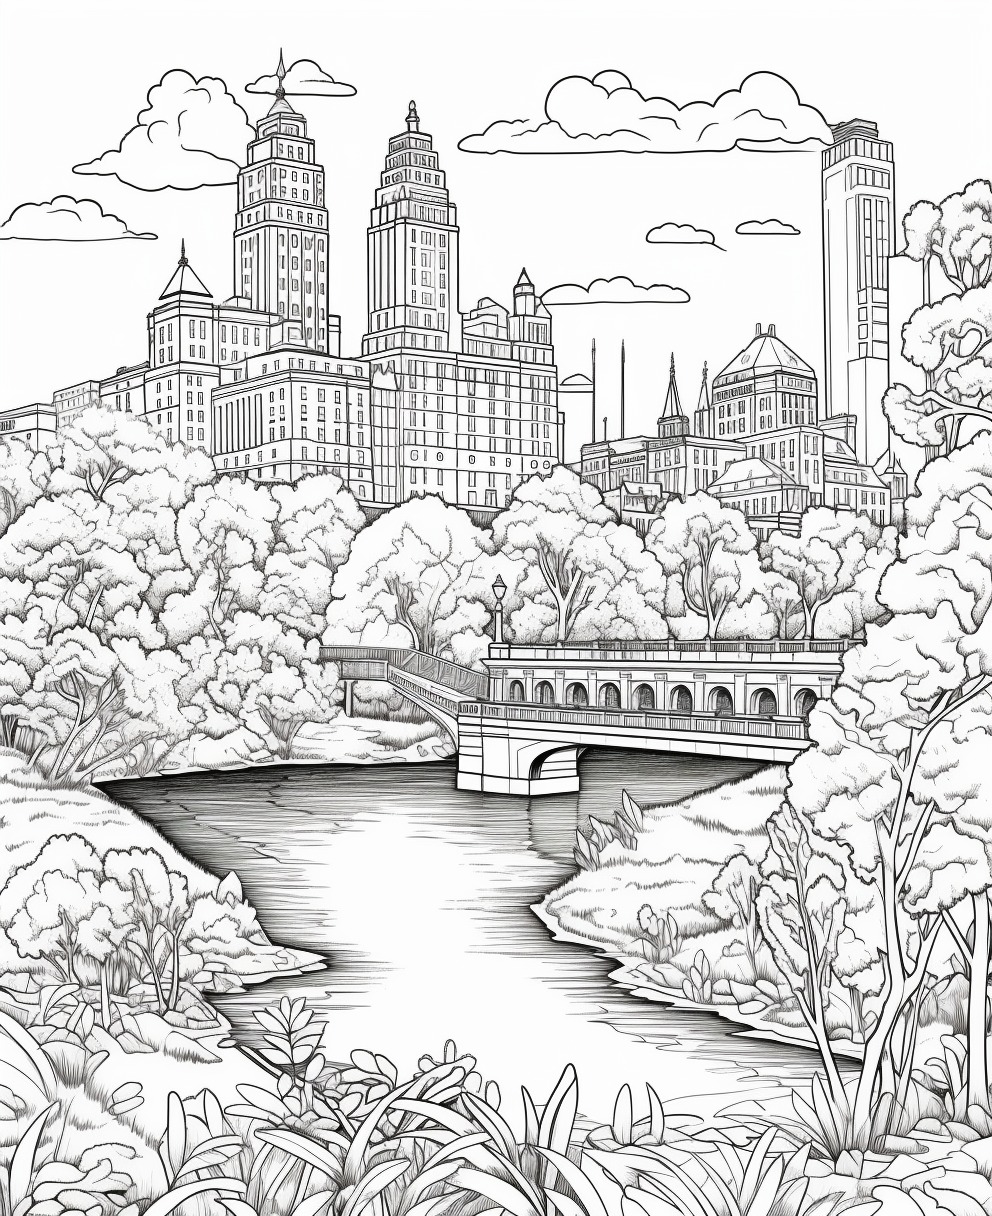 kristnjnsn_adult_coloring_book_black_and_white_central_park_976f0b9a-2c47-49d4-adeb-ffa2706221b2